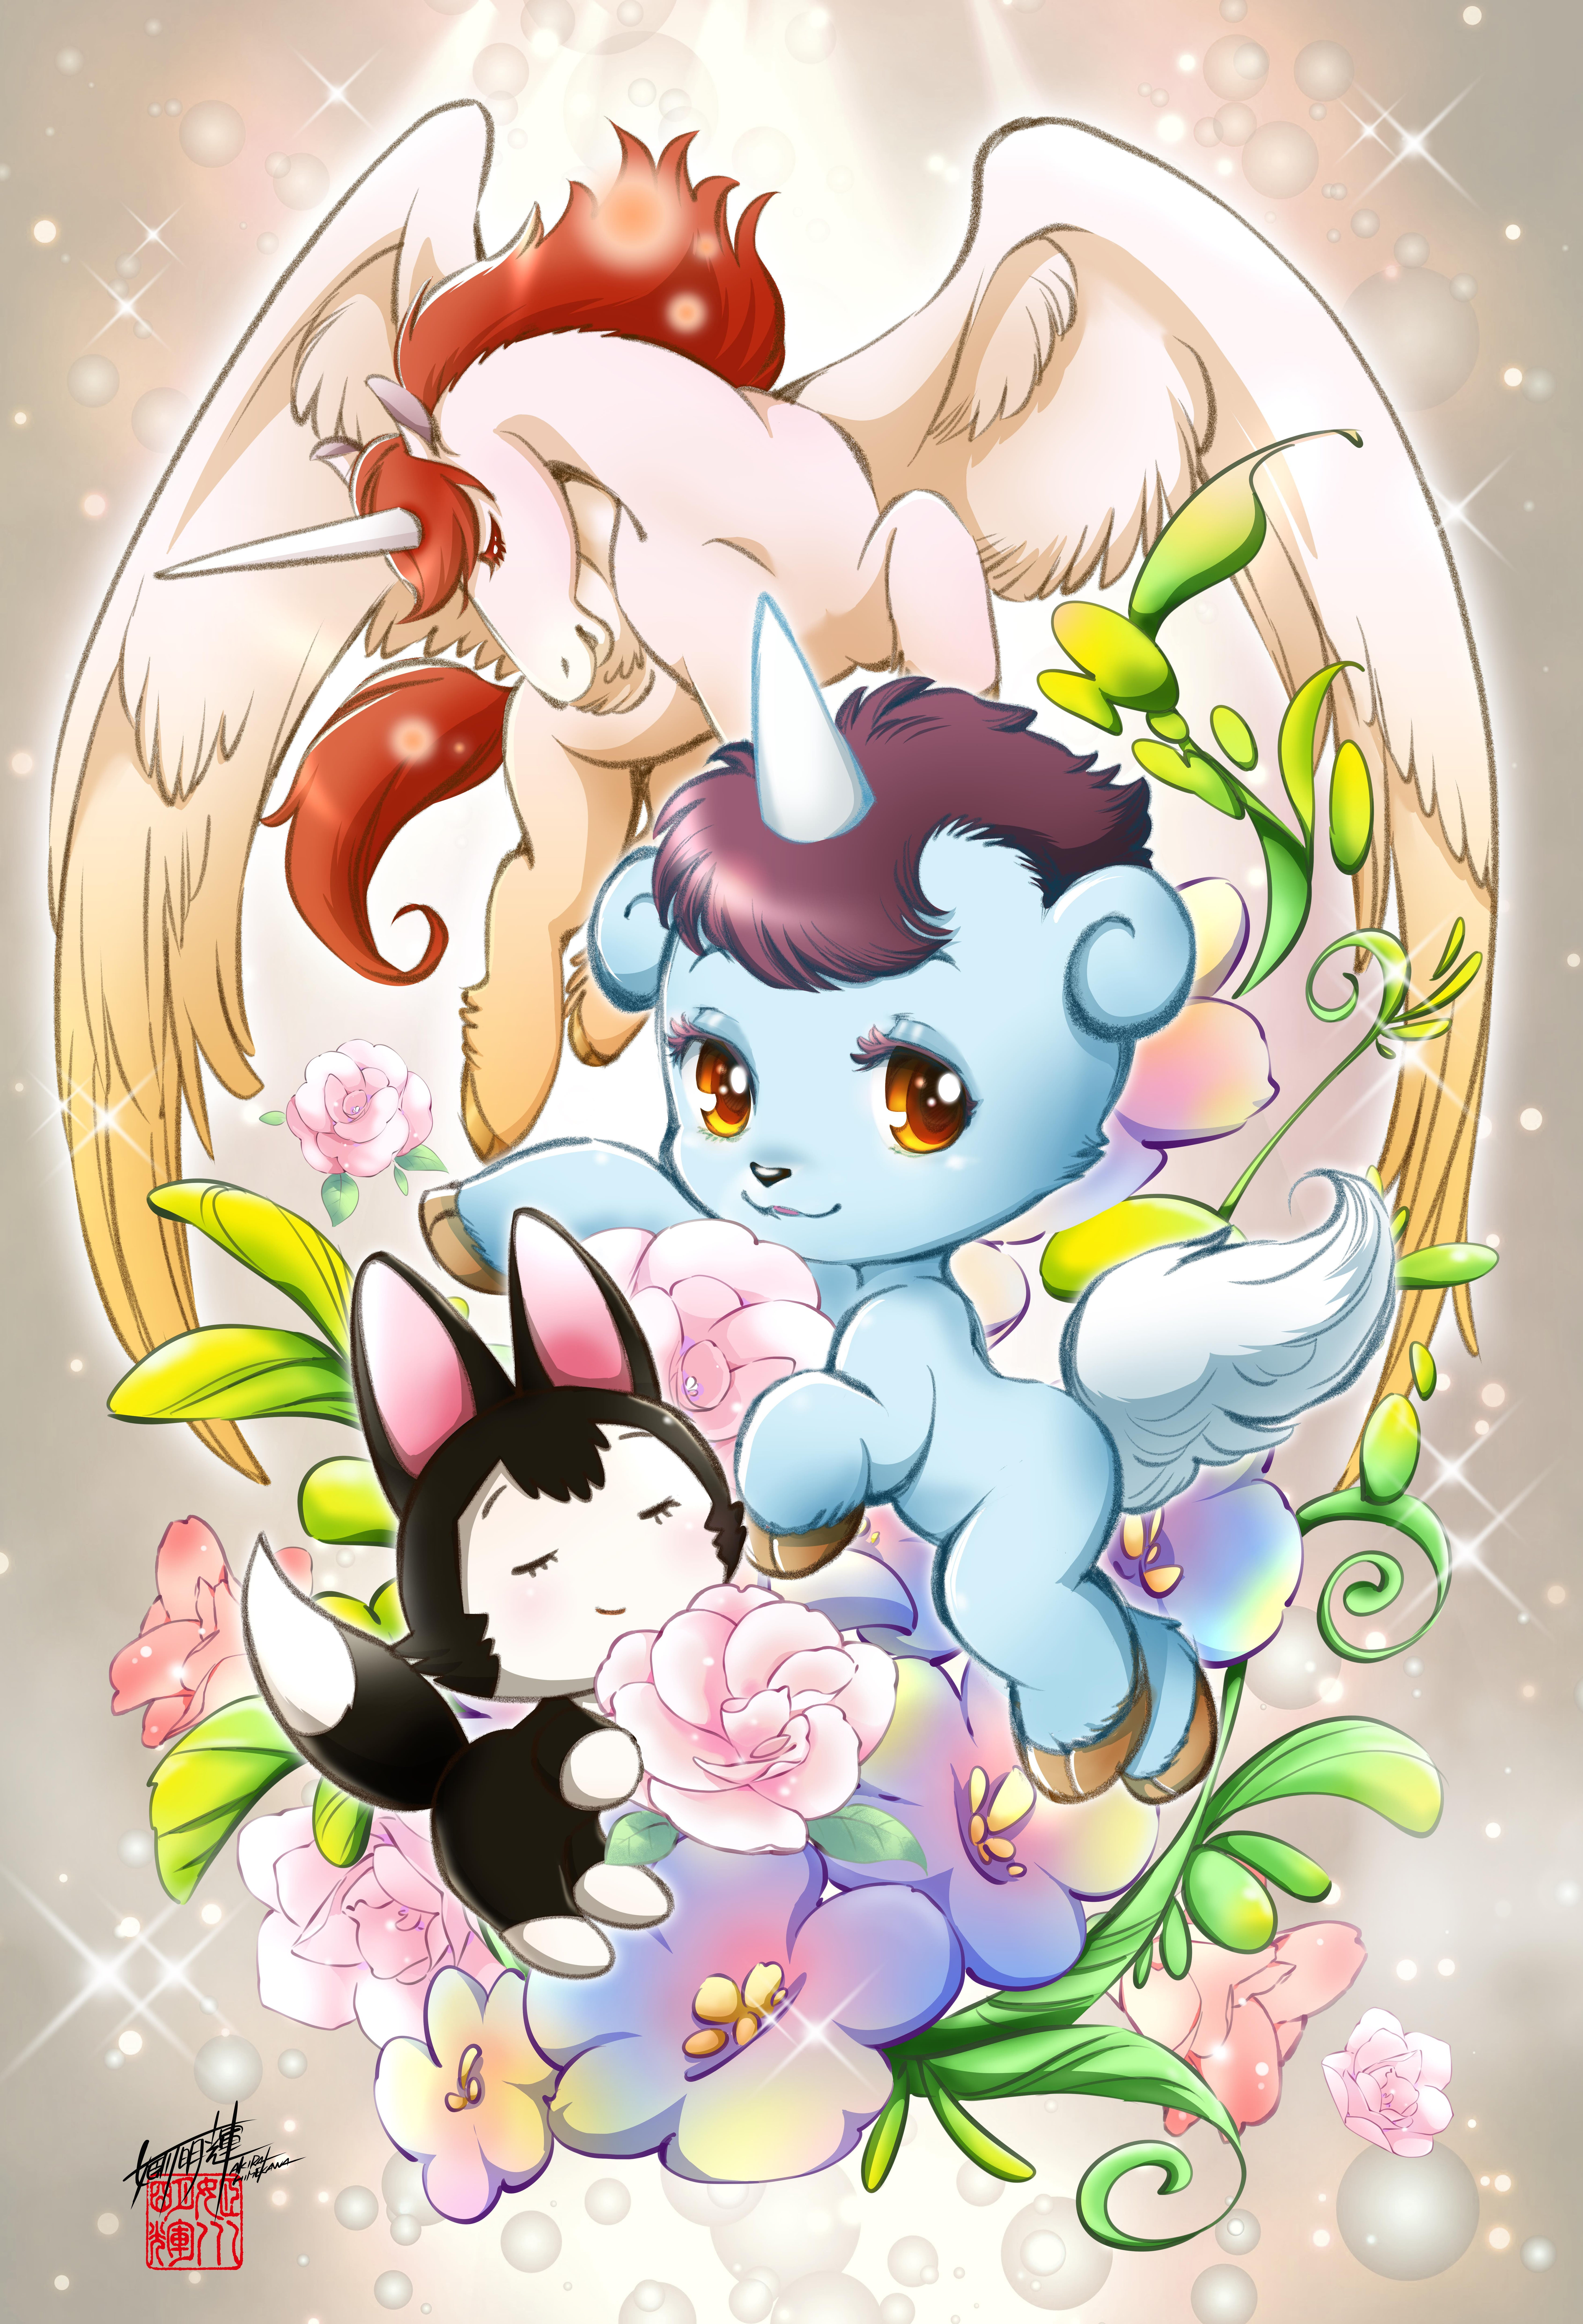 Unico and two other characters flying, with flowers